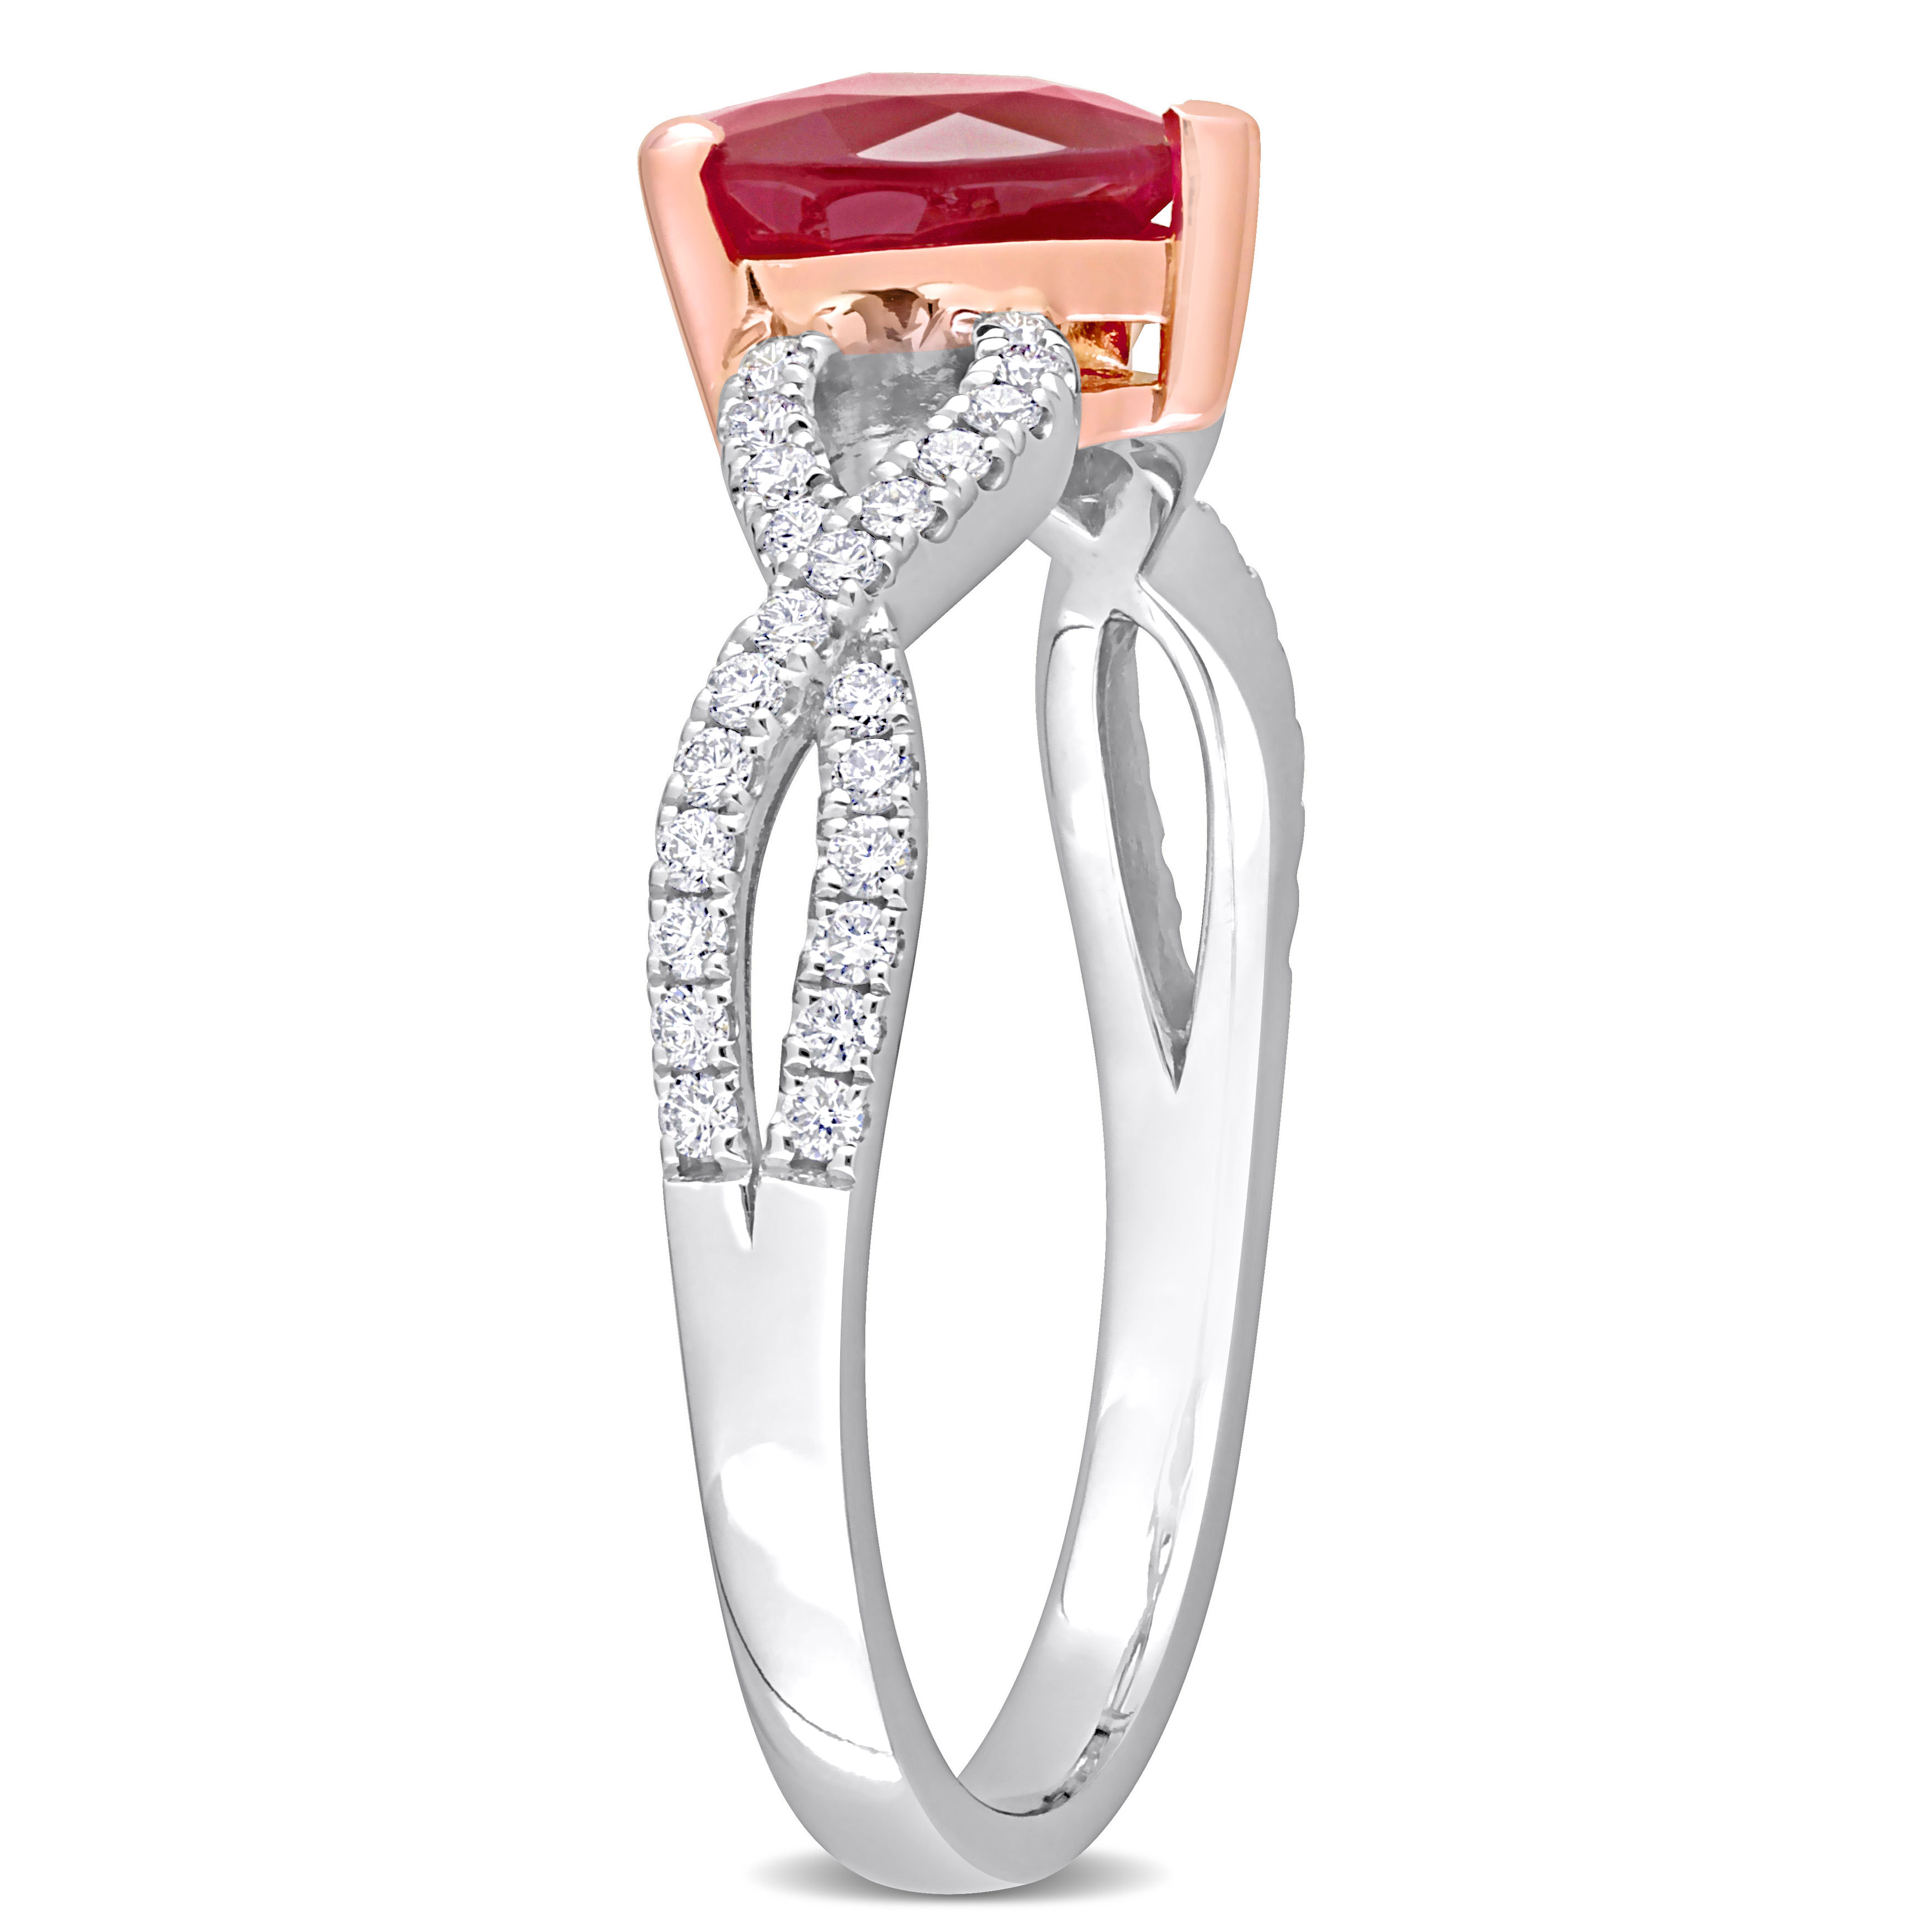 1/4 CT TW Diamond and Ruby Heart Infinity Ring in 14k 2-Tone White and Rose Gold